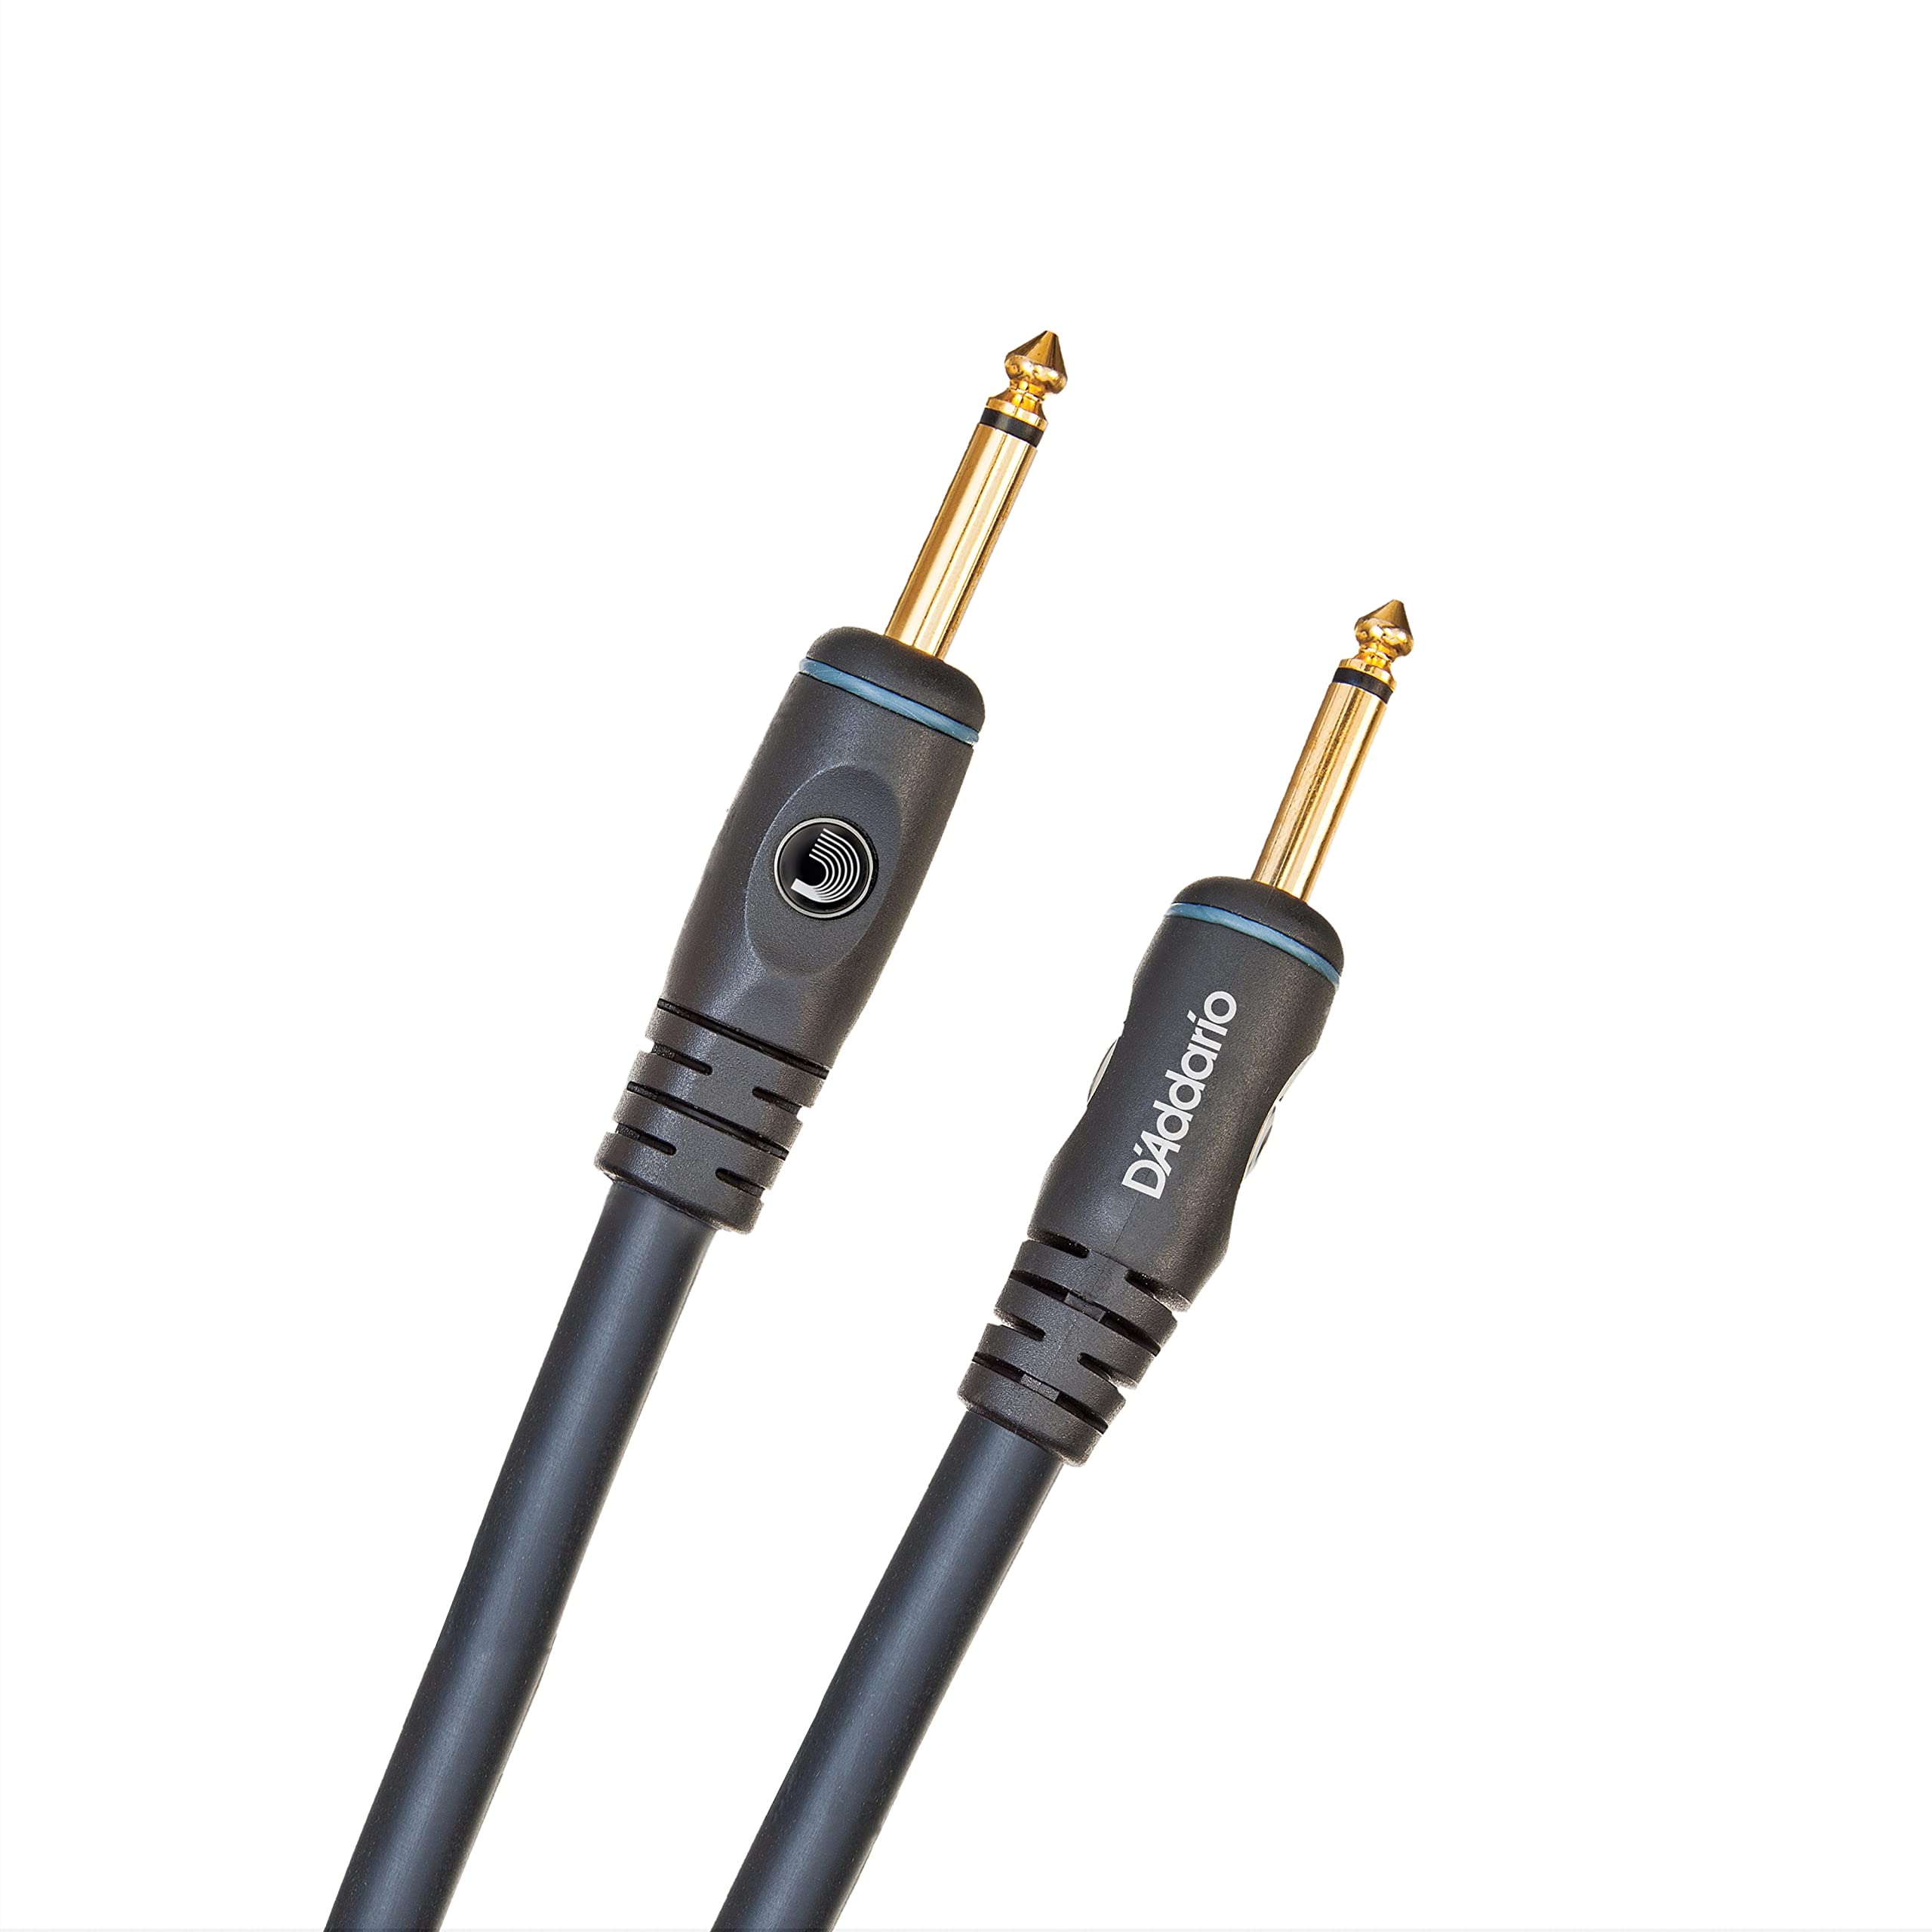 D'Addario Accessories Speaker Cable - Gold Plated Plugs for Optimal Signal Flow - Shielded for Noise Reduction - 1/4 Inch Male to 1/4 Inch Male - Custom Series - 5 Feet/1.52 Meter